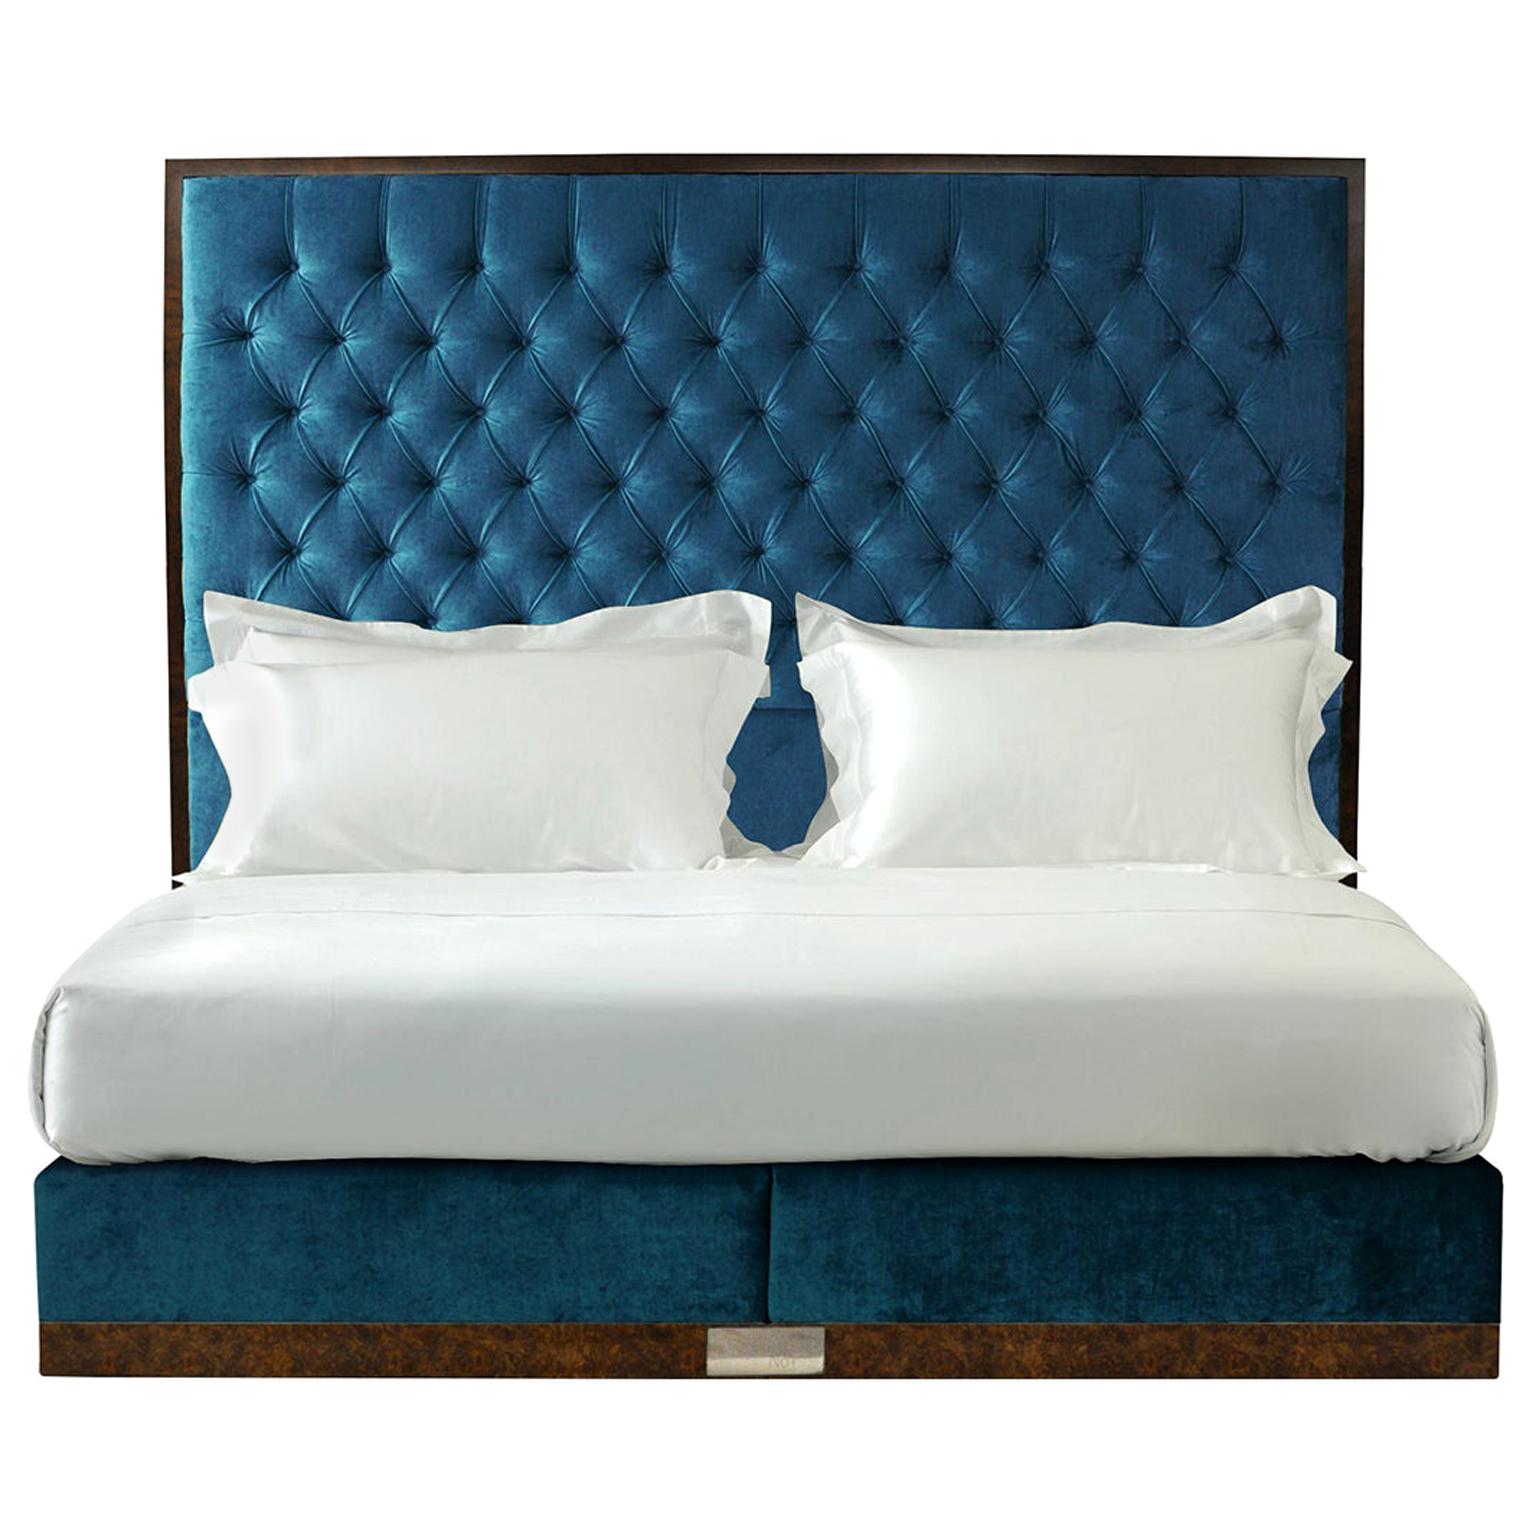 Savoir State Bed in Blue Velvet, Made to Order in London, California King Size For Sale